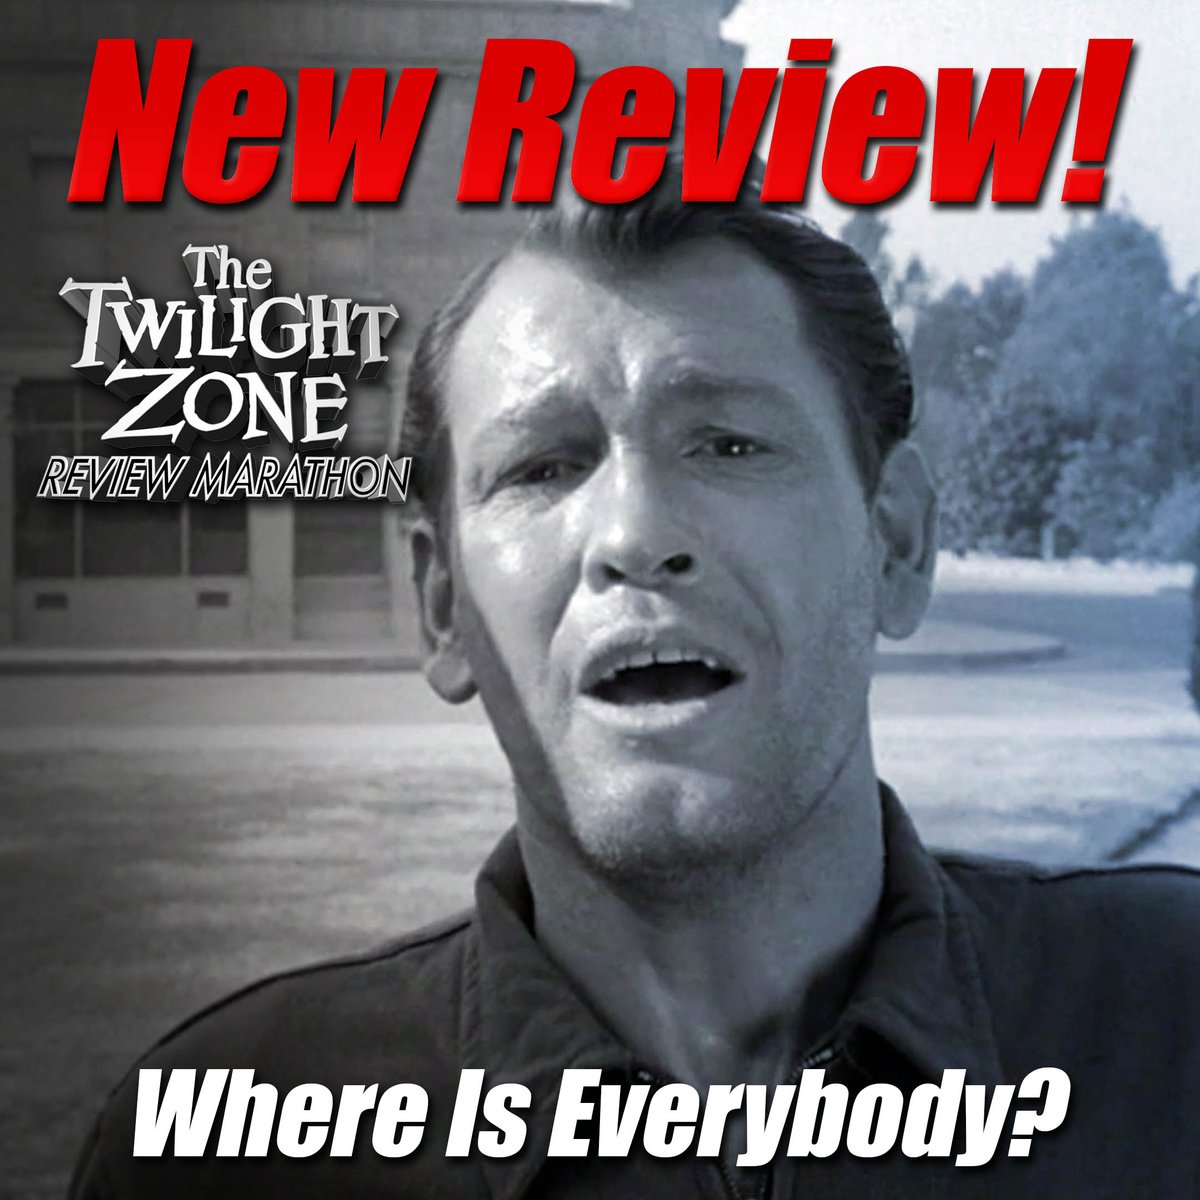 NEW REVIEW! This is where it all began! The pilot episode of 'The Twilight Zone!' 'Where is Everybody?' stars Earl Holliman as an amnesiac who wanders into a strange town where there's no people. WATCH HERE: youtu.be/nmOuRI_CmIs?si…